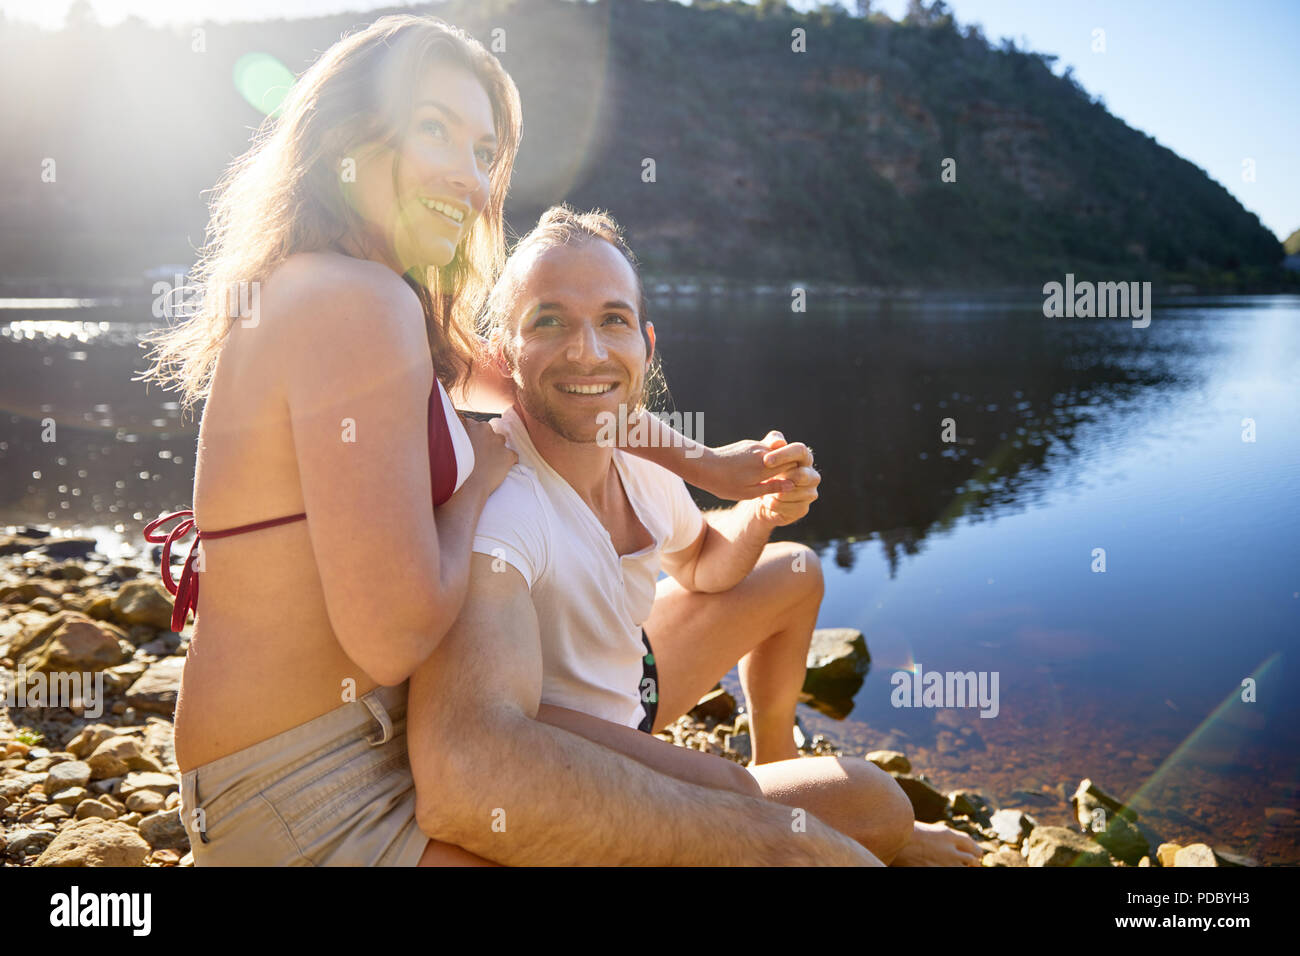 Portrait affectionate, carefree couple holding hands at sunny summer lake Stock Photo